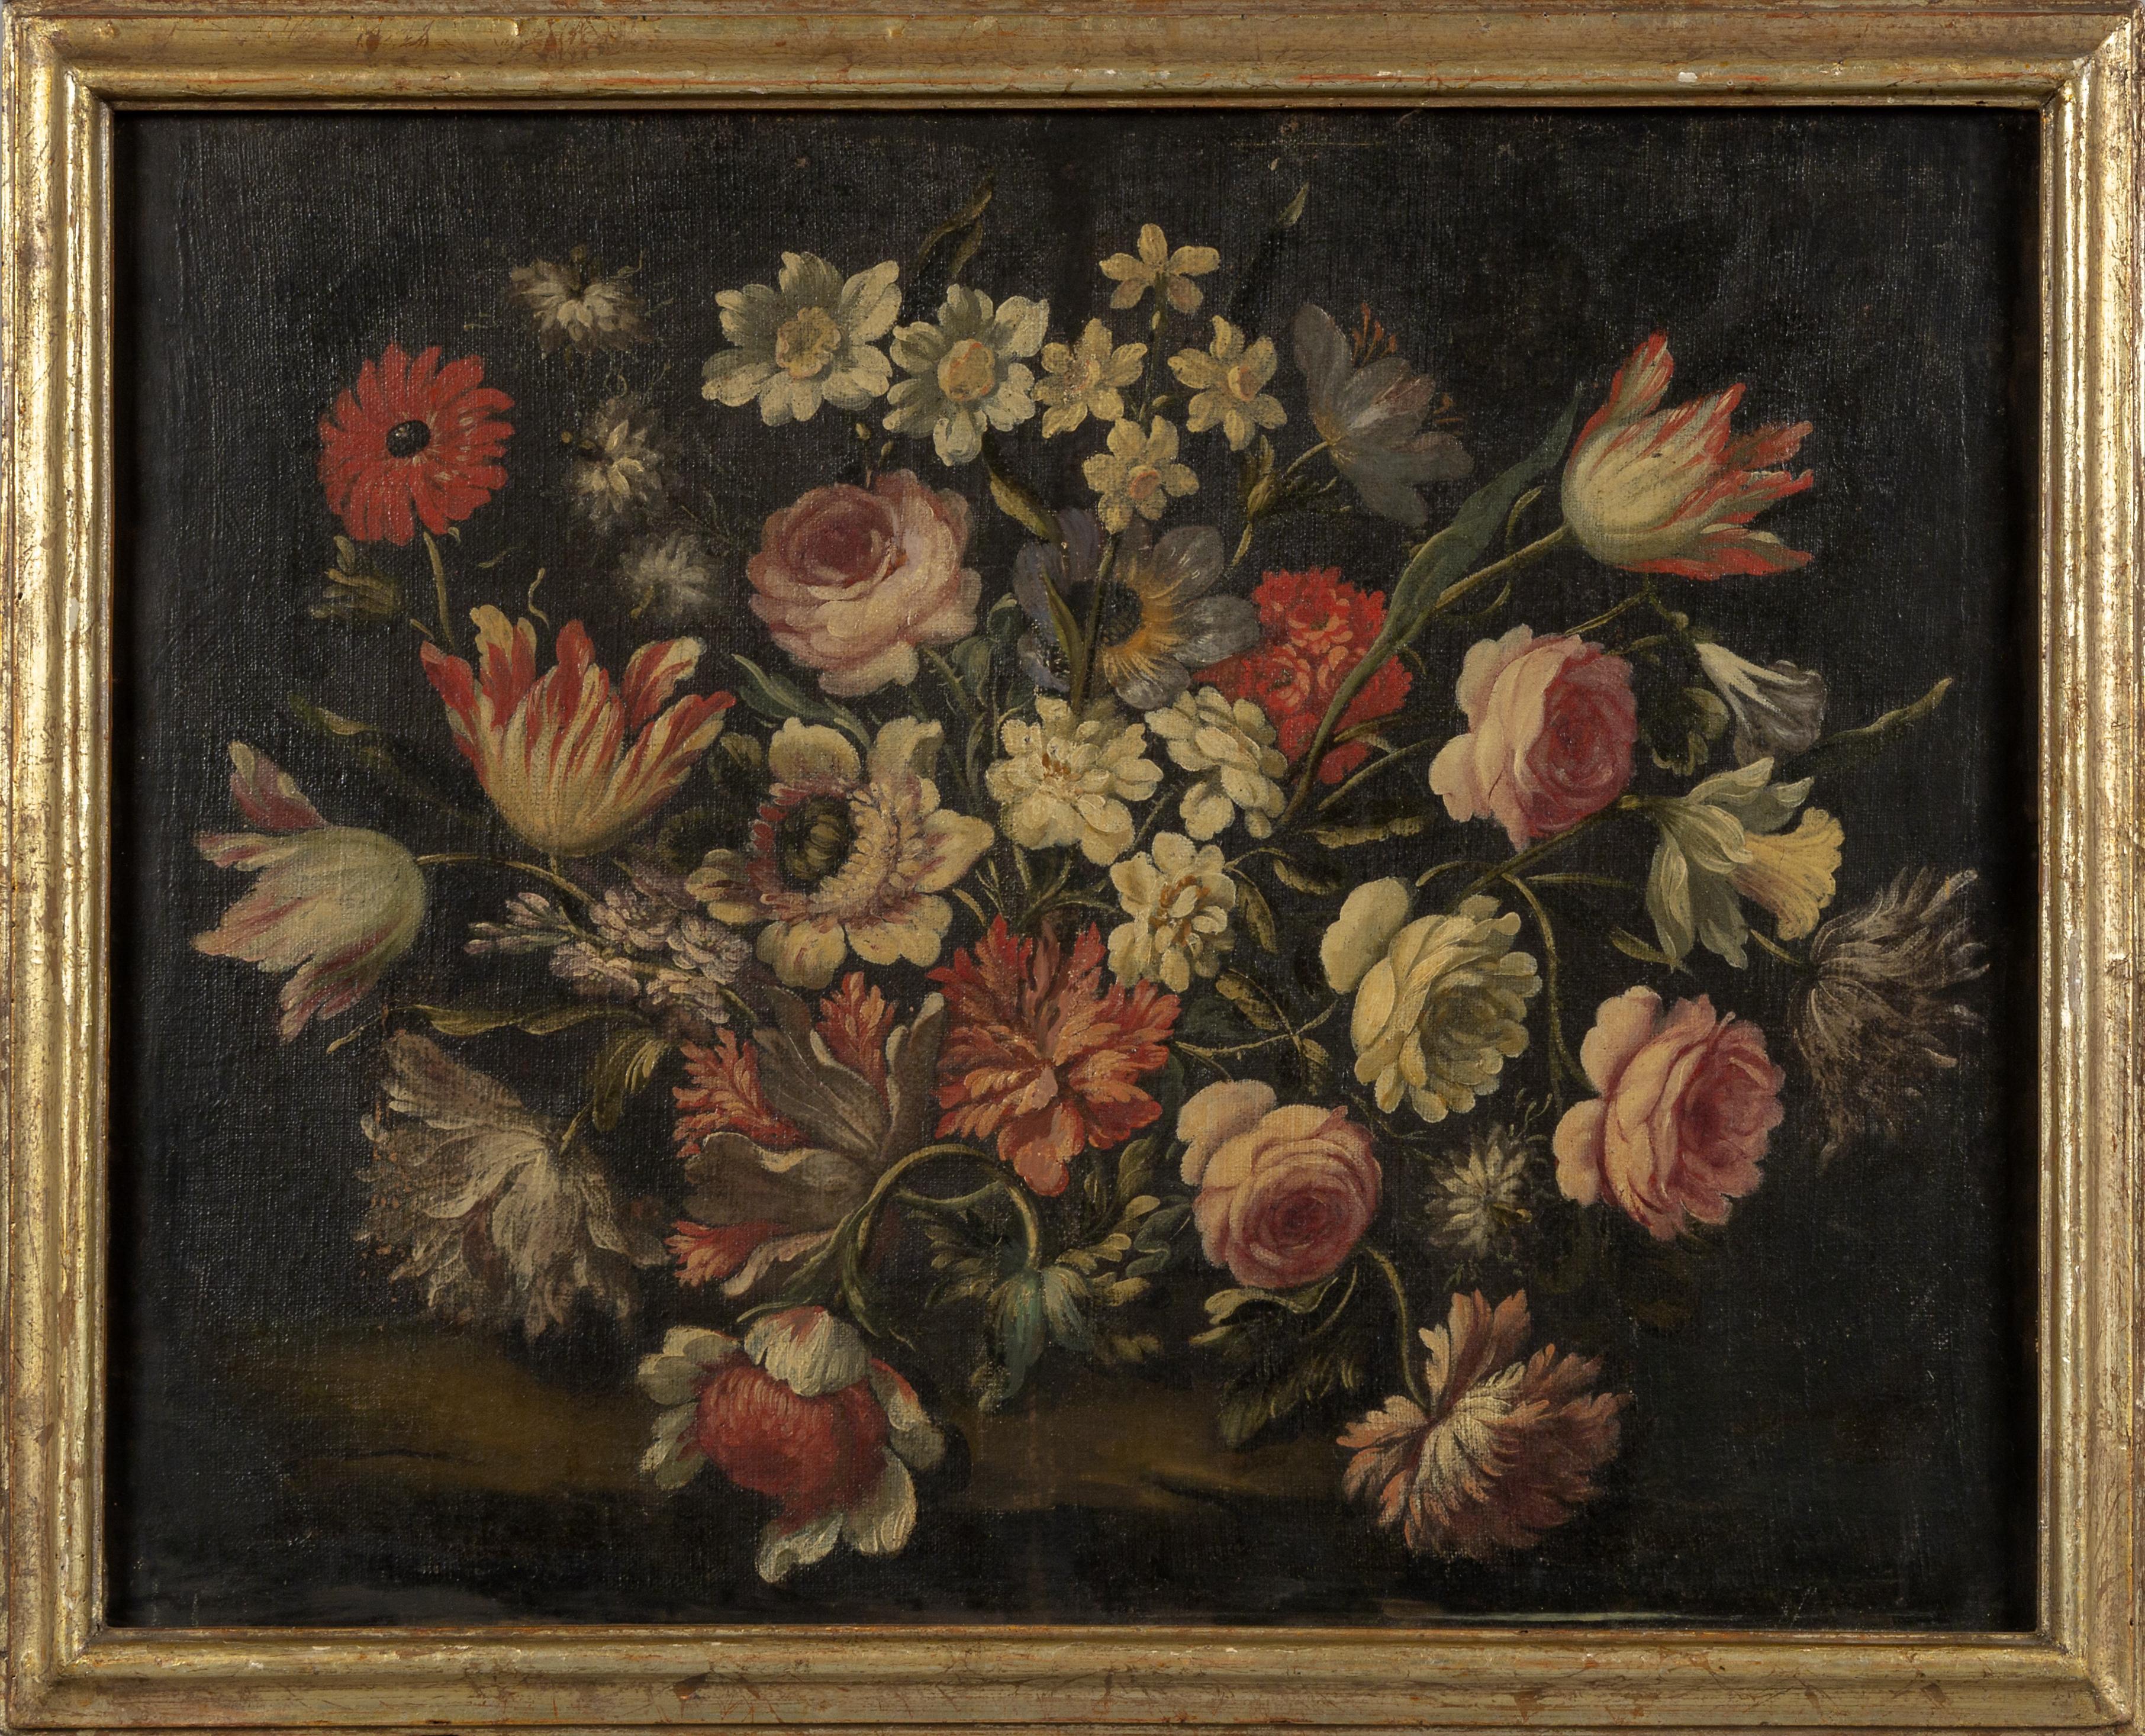 A beautifully aged pair of 17th century Baroque Italian Floral Still Life Paintings

School or influence of Orsola Maddalena Caccia
Piedmont region, Italy; mid-17th century
Oil on canvas; giltwood frames

Approximate size:  22.75 (h) x 29 (w) x 2